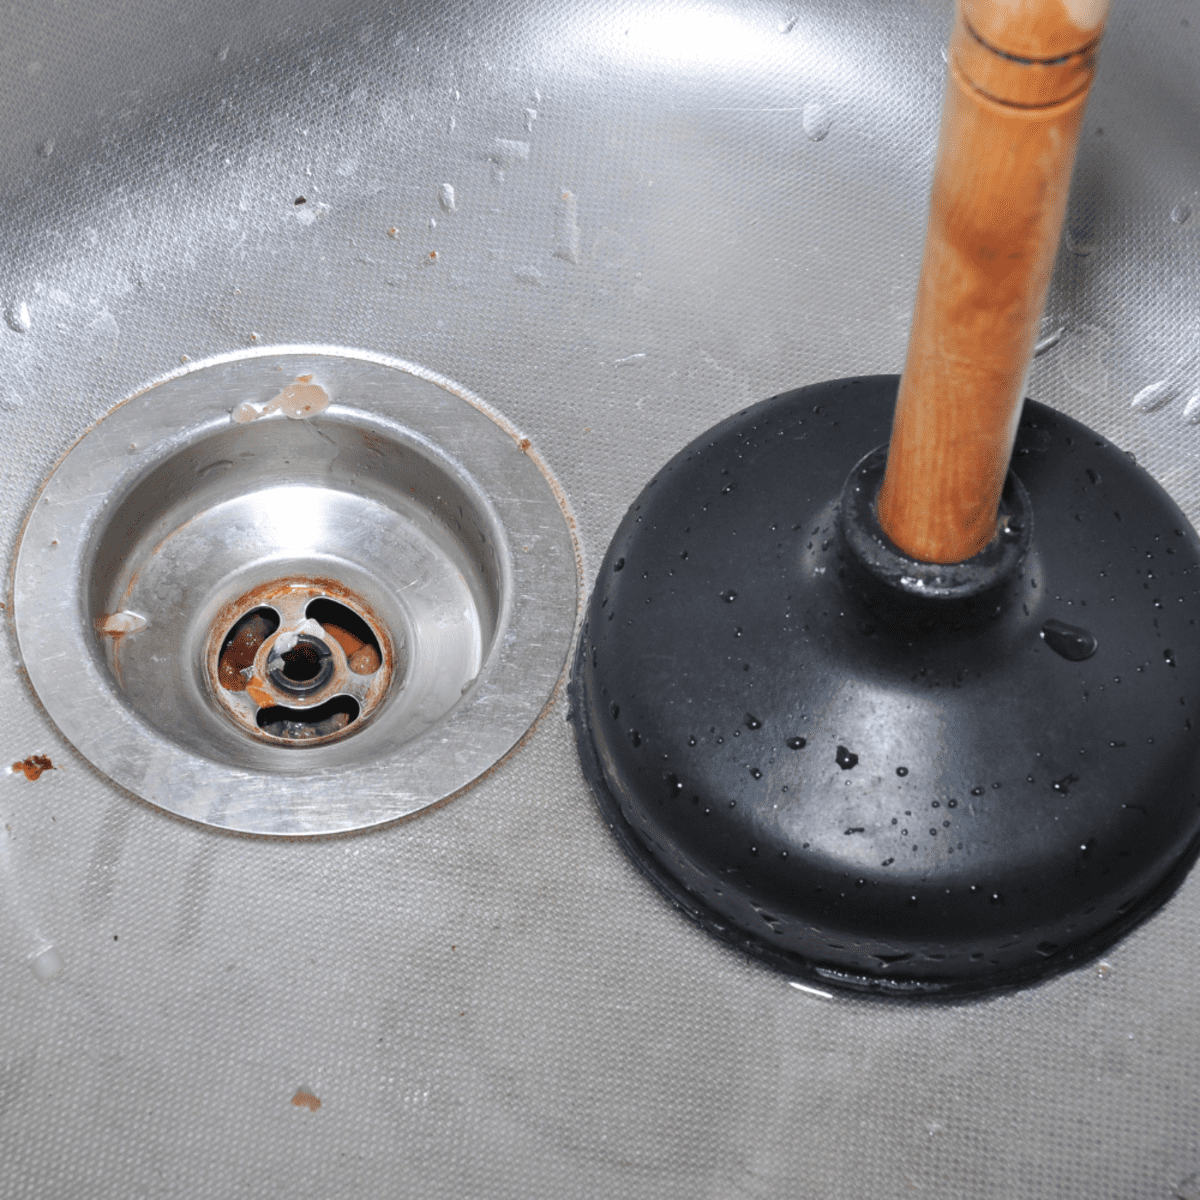 Clogged Bath Tub Drain Prevention And Cures - Balkan Drain Cleaning